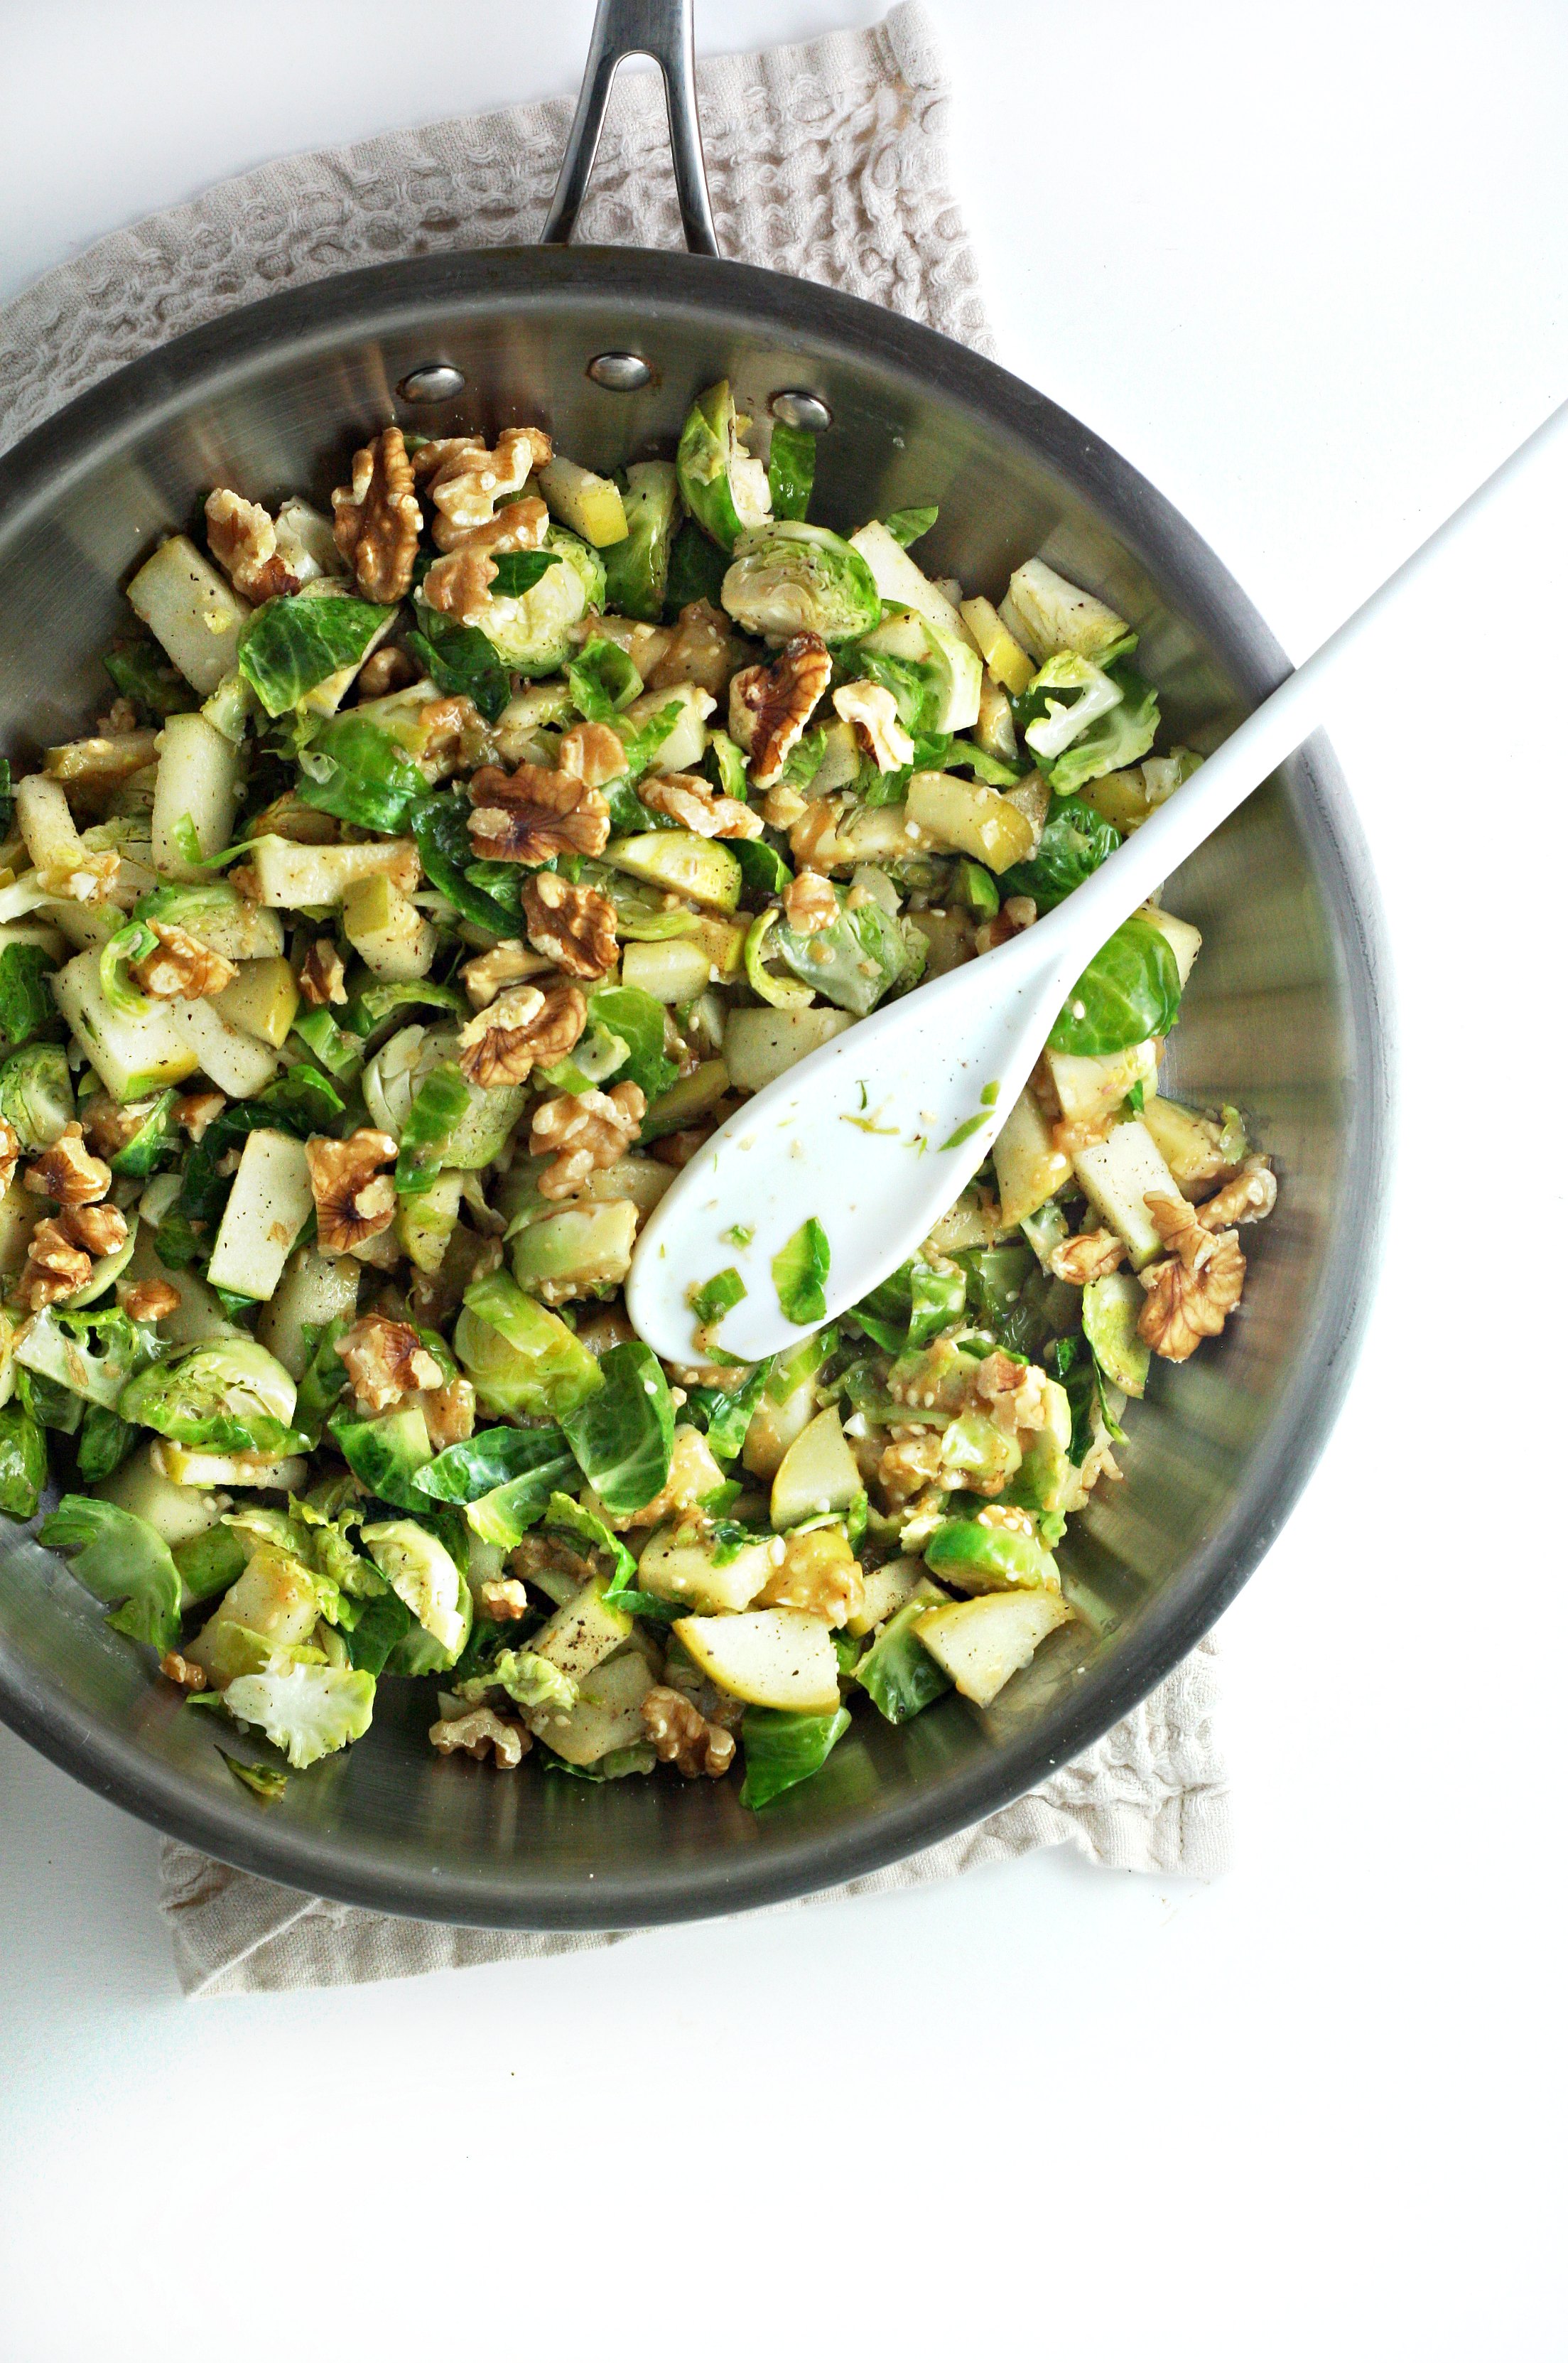 Miso Apples and Brussels Sprouts